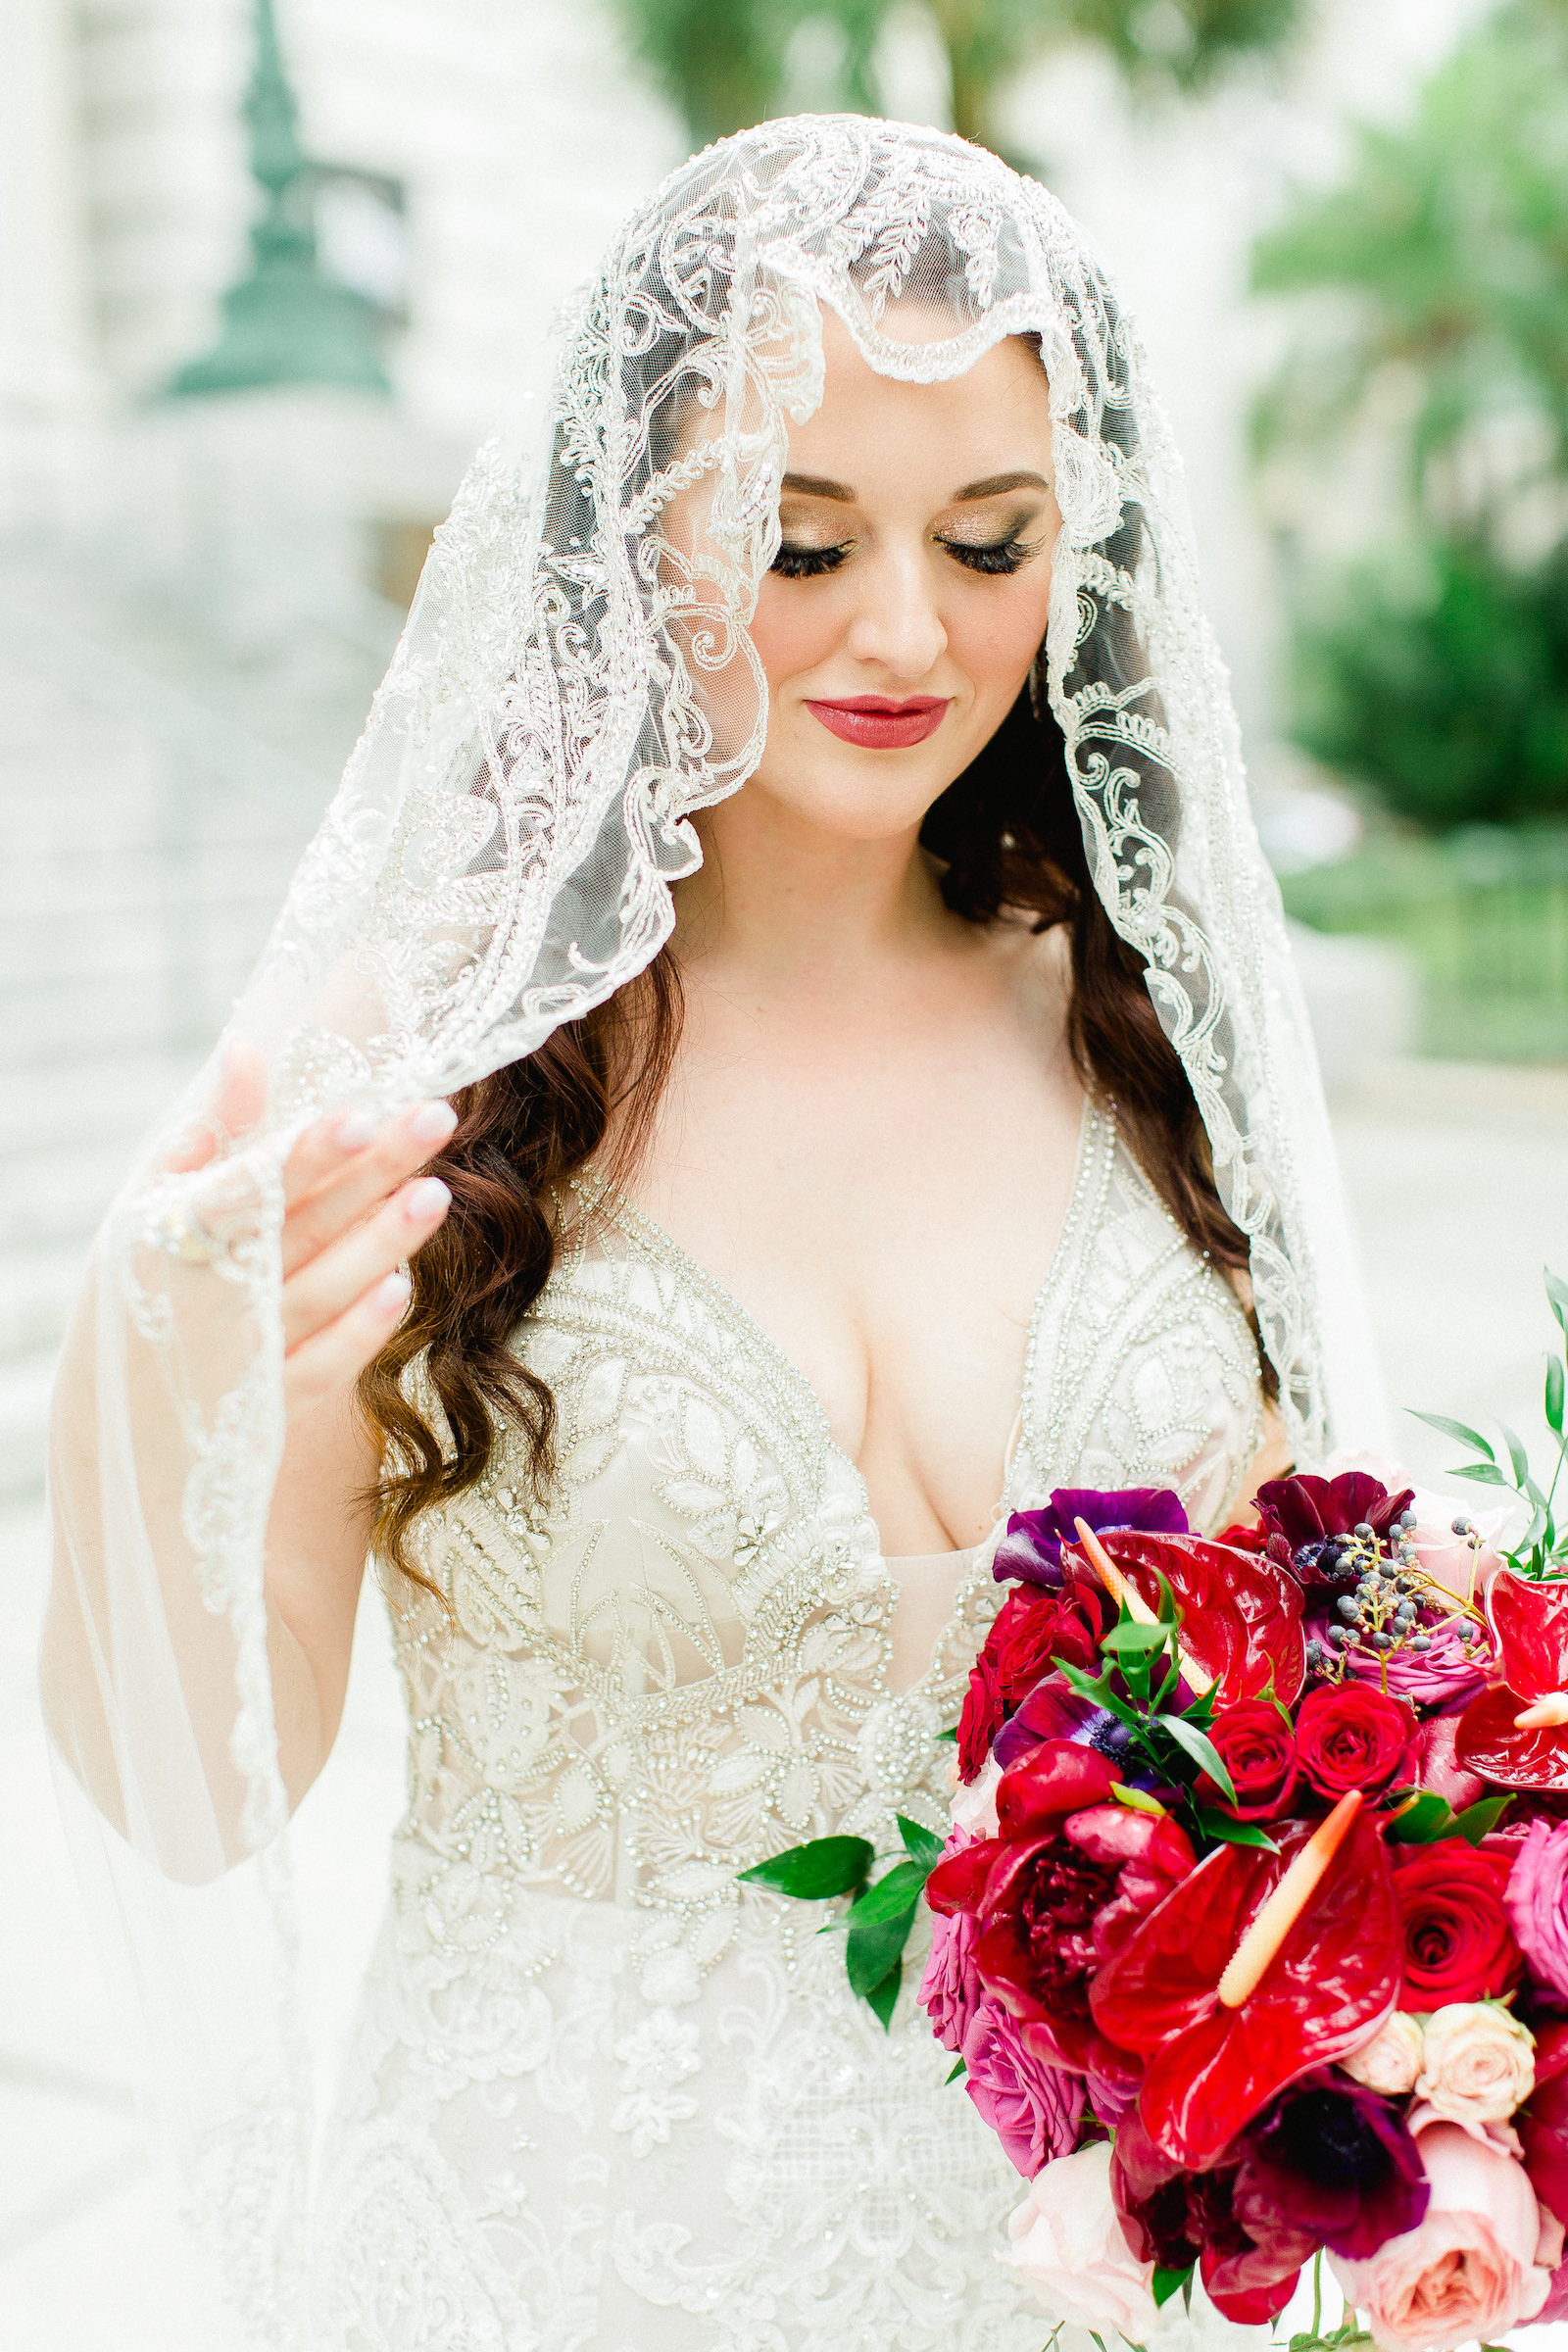 Bride Wearing Embroidered Rhinestone Circle Veil | Rhinestone Embroidered Wedding Dress Bridal Gown | Bright Colorful Pink and Red Wedding Bridal Bouquet with Roses and Flamingo Lilies Anthurium